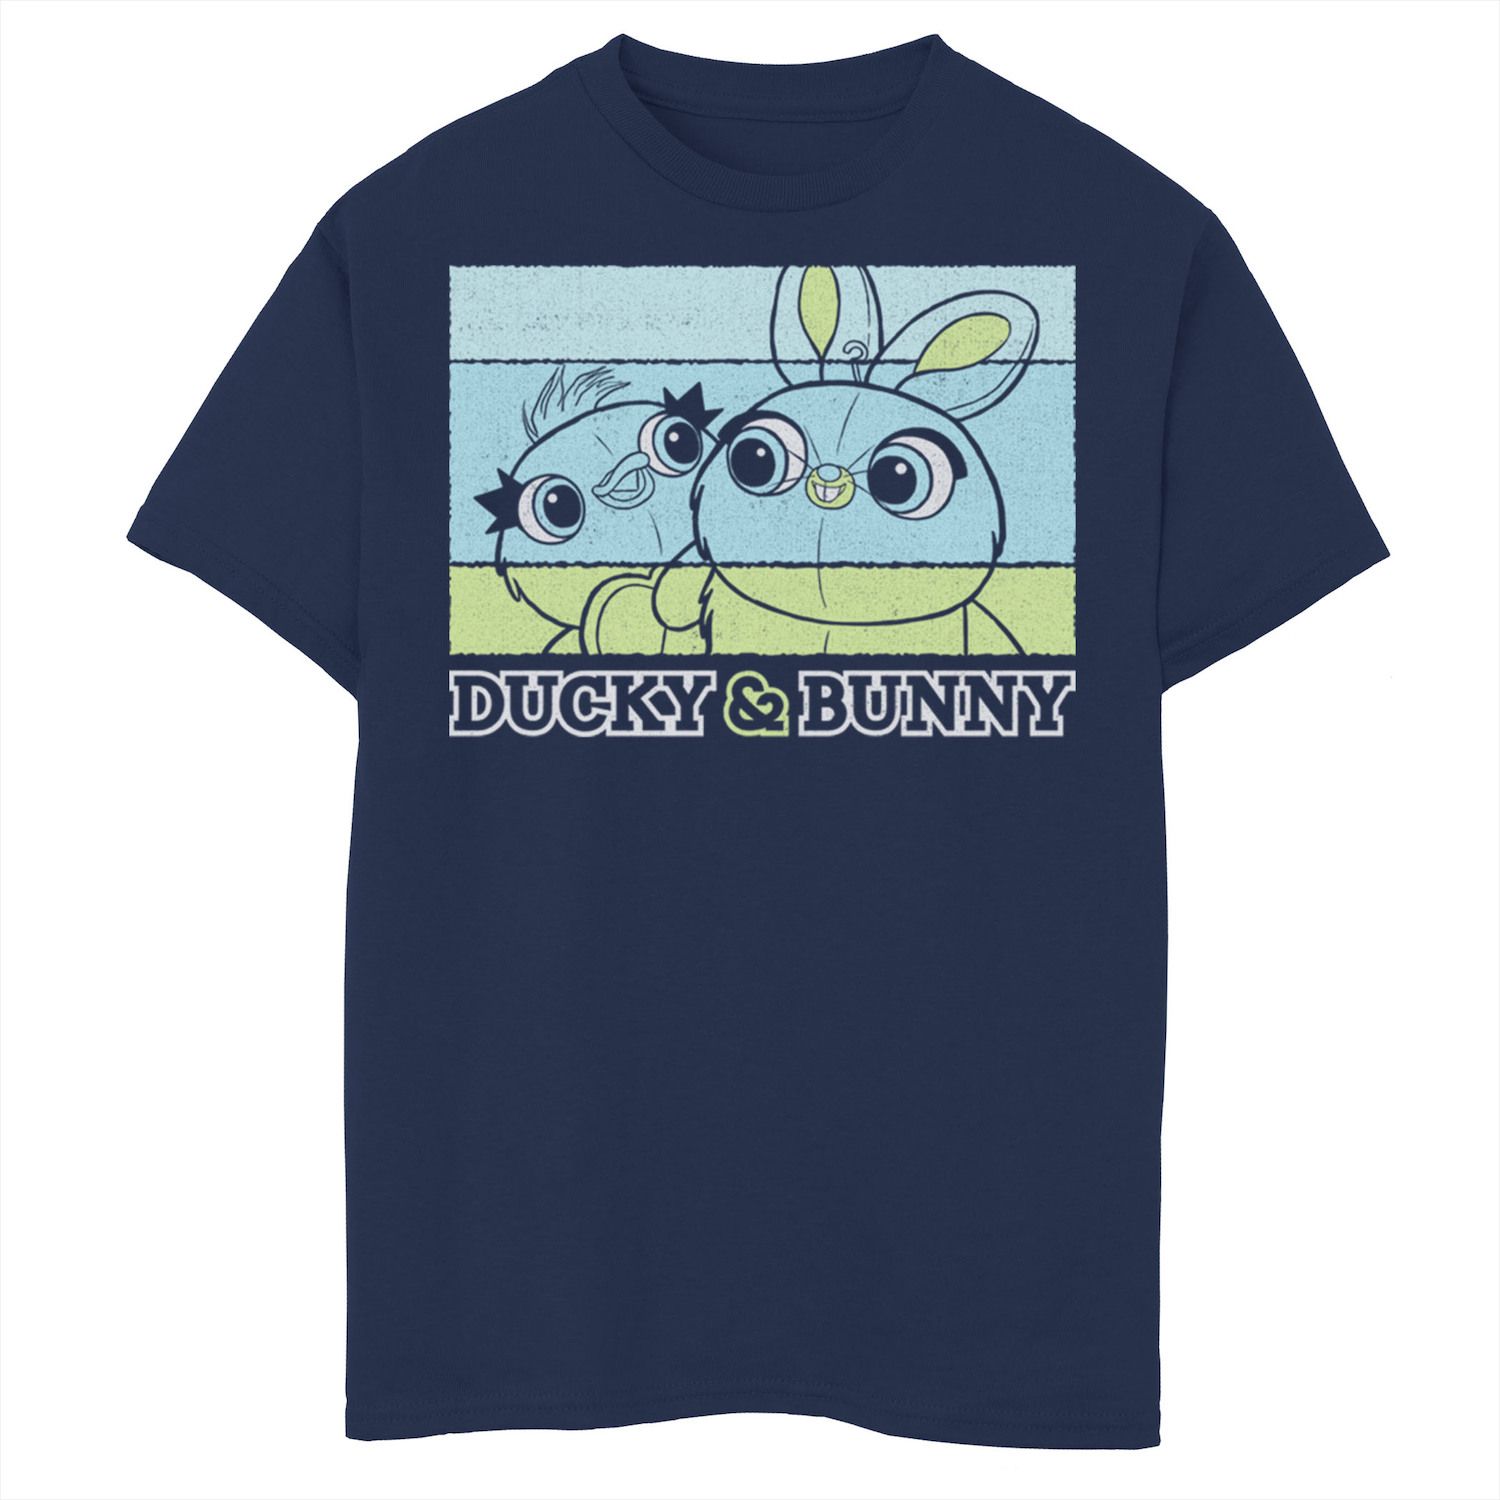 Image for Disney / Pixar s Toy Story 4 Boys 8-20 Duck & Bunny Retro Style Poster Graphic Tee at Kohl's.